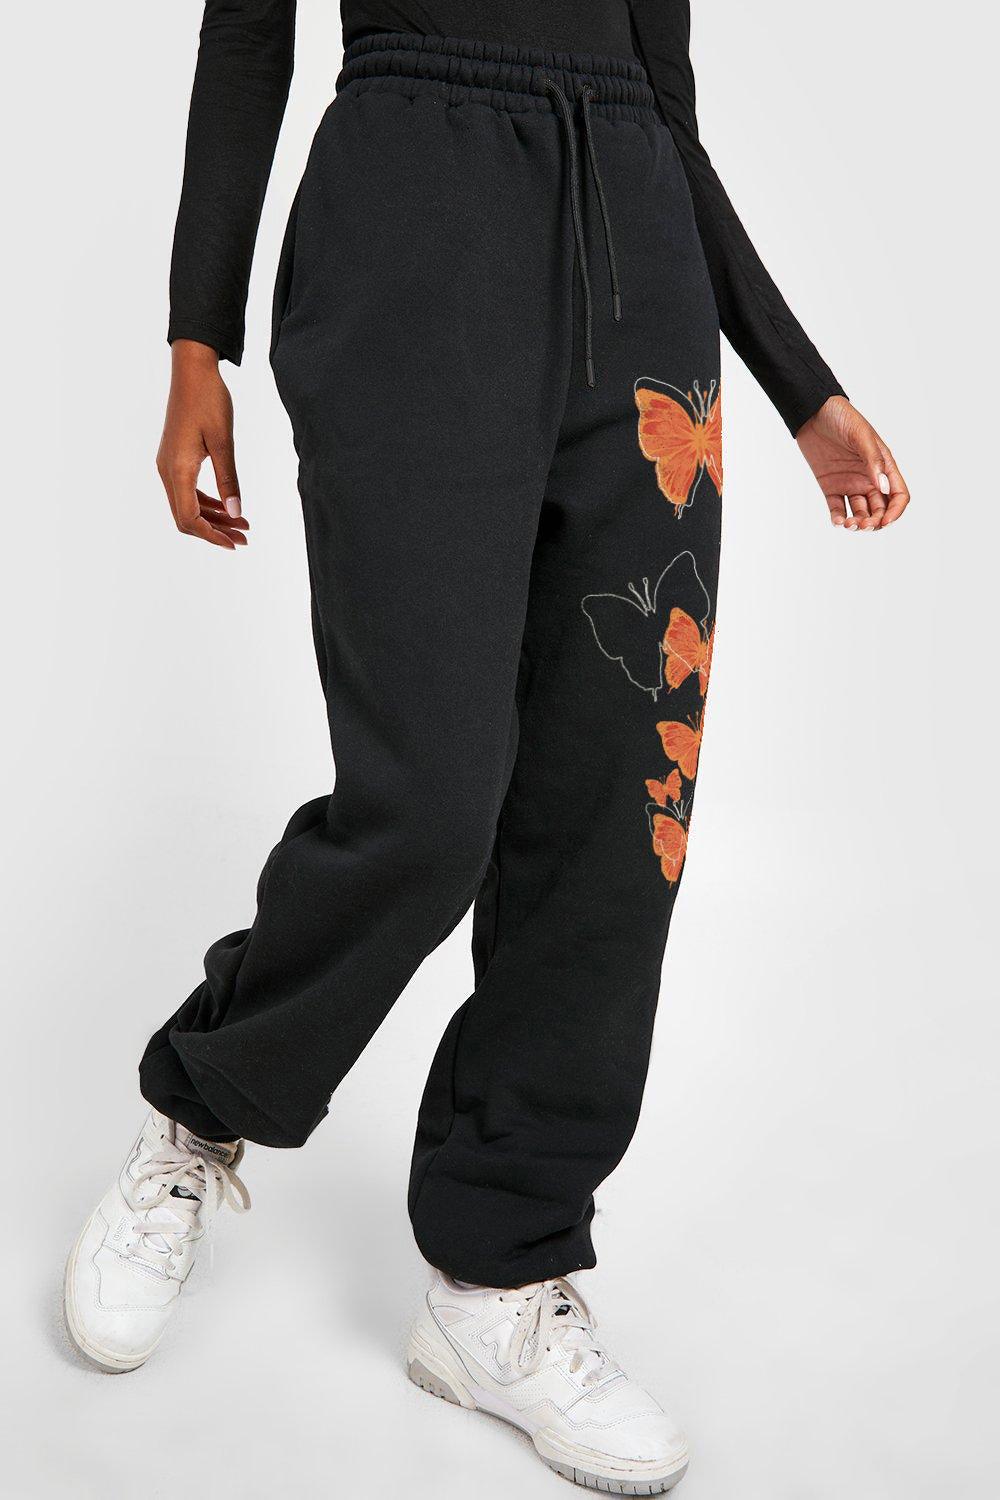 Simply Love Full Size Butterfly Graphic Sweatpants - Vesteeto